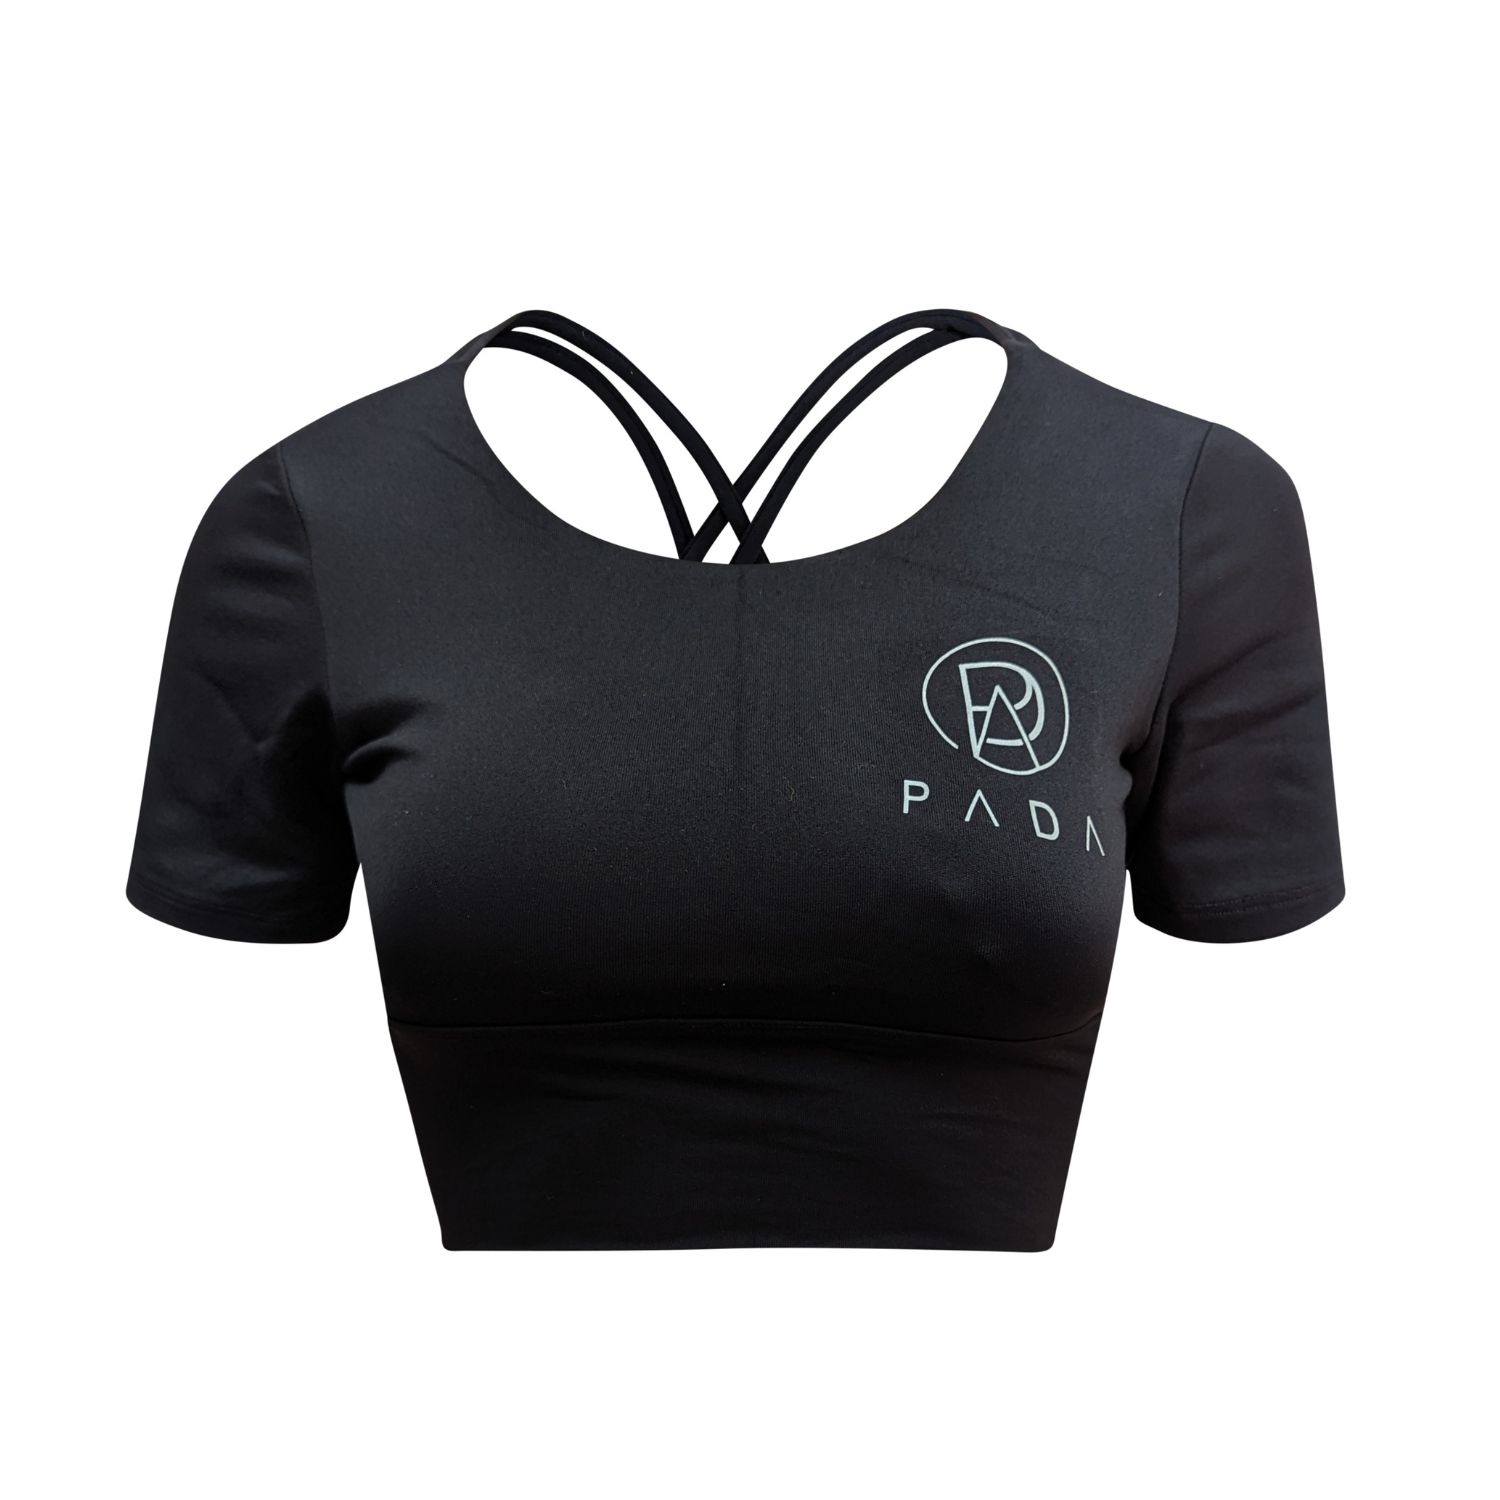 Pada Women's Black Criss-cross Cropped Gym Top With In Built Sports Bra